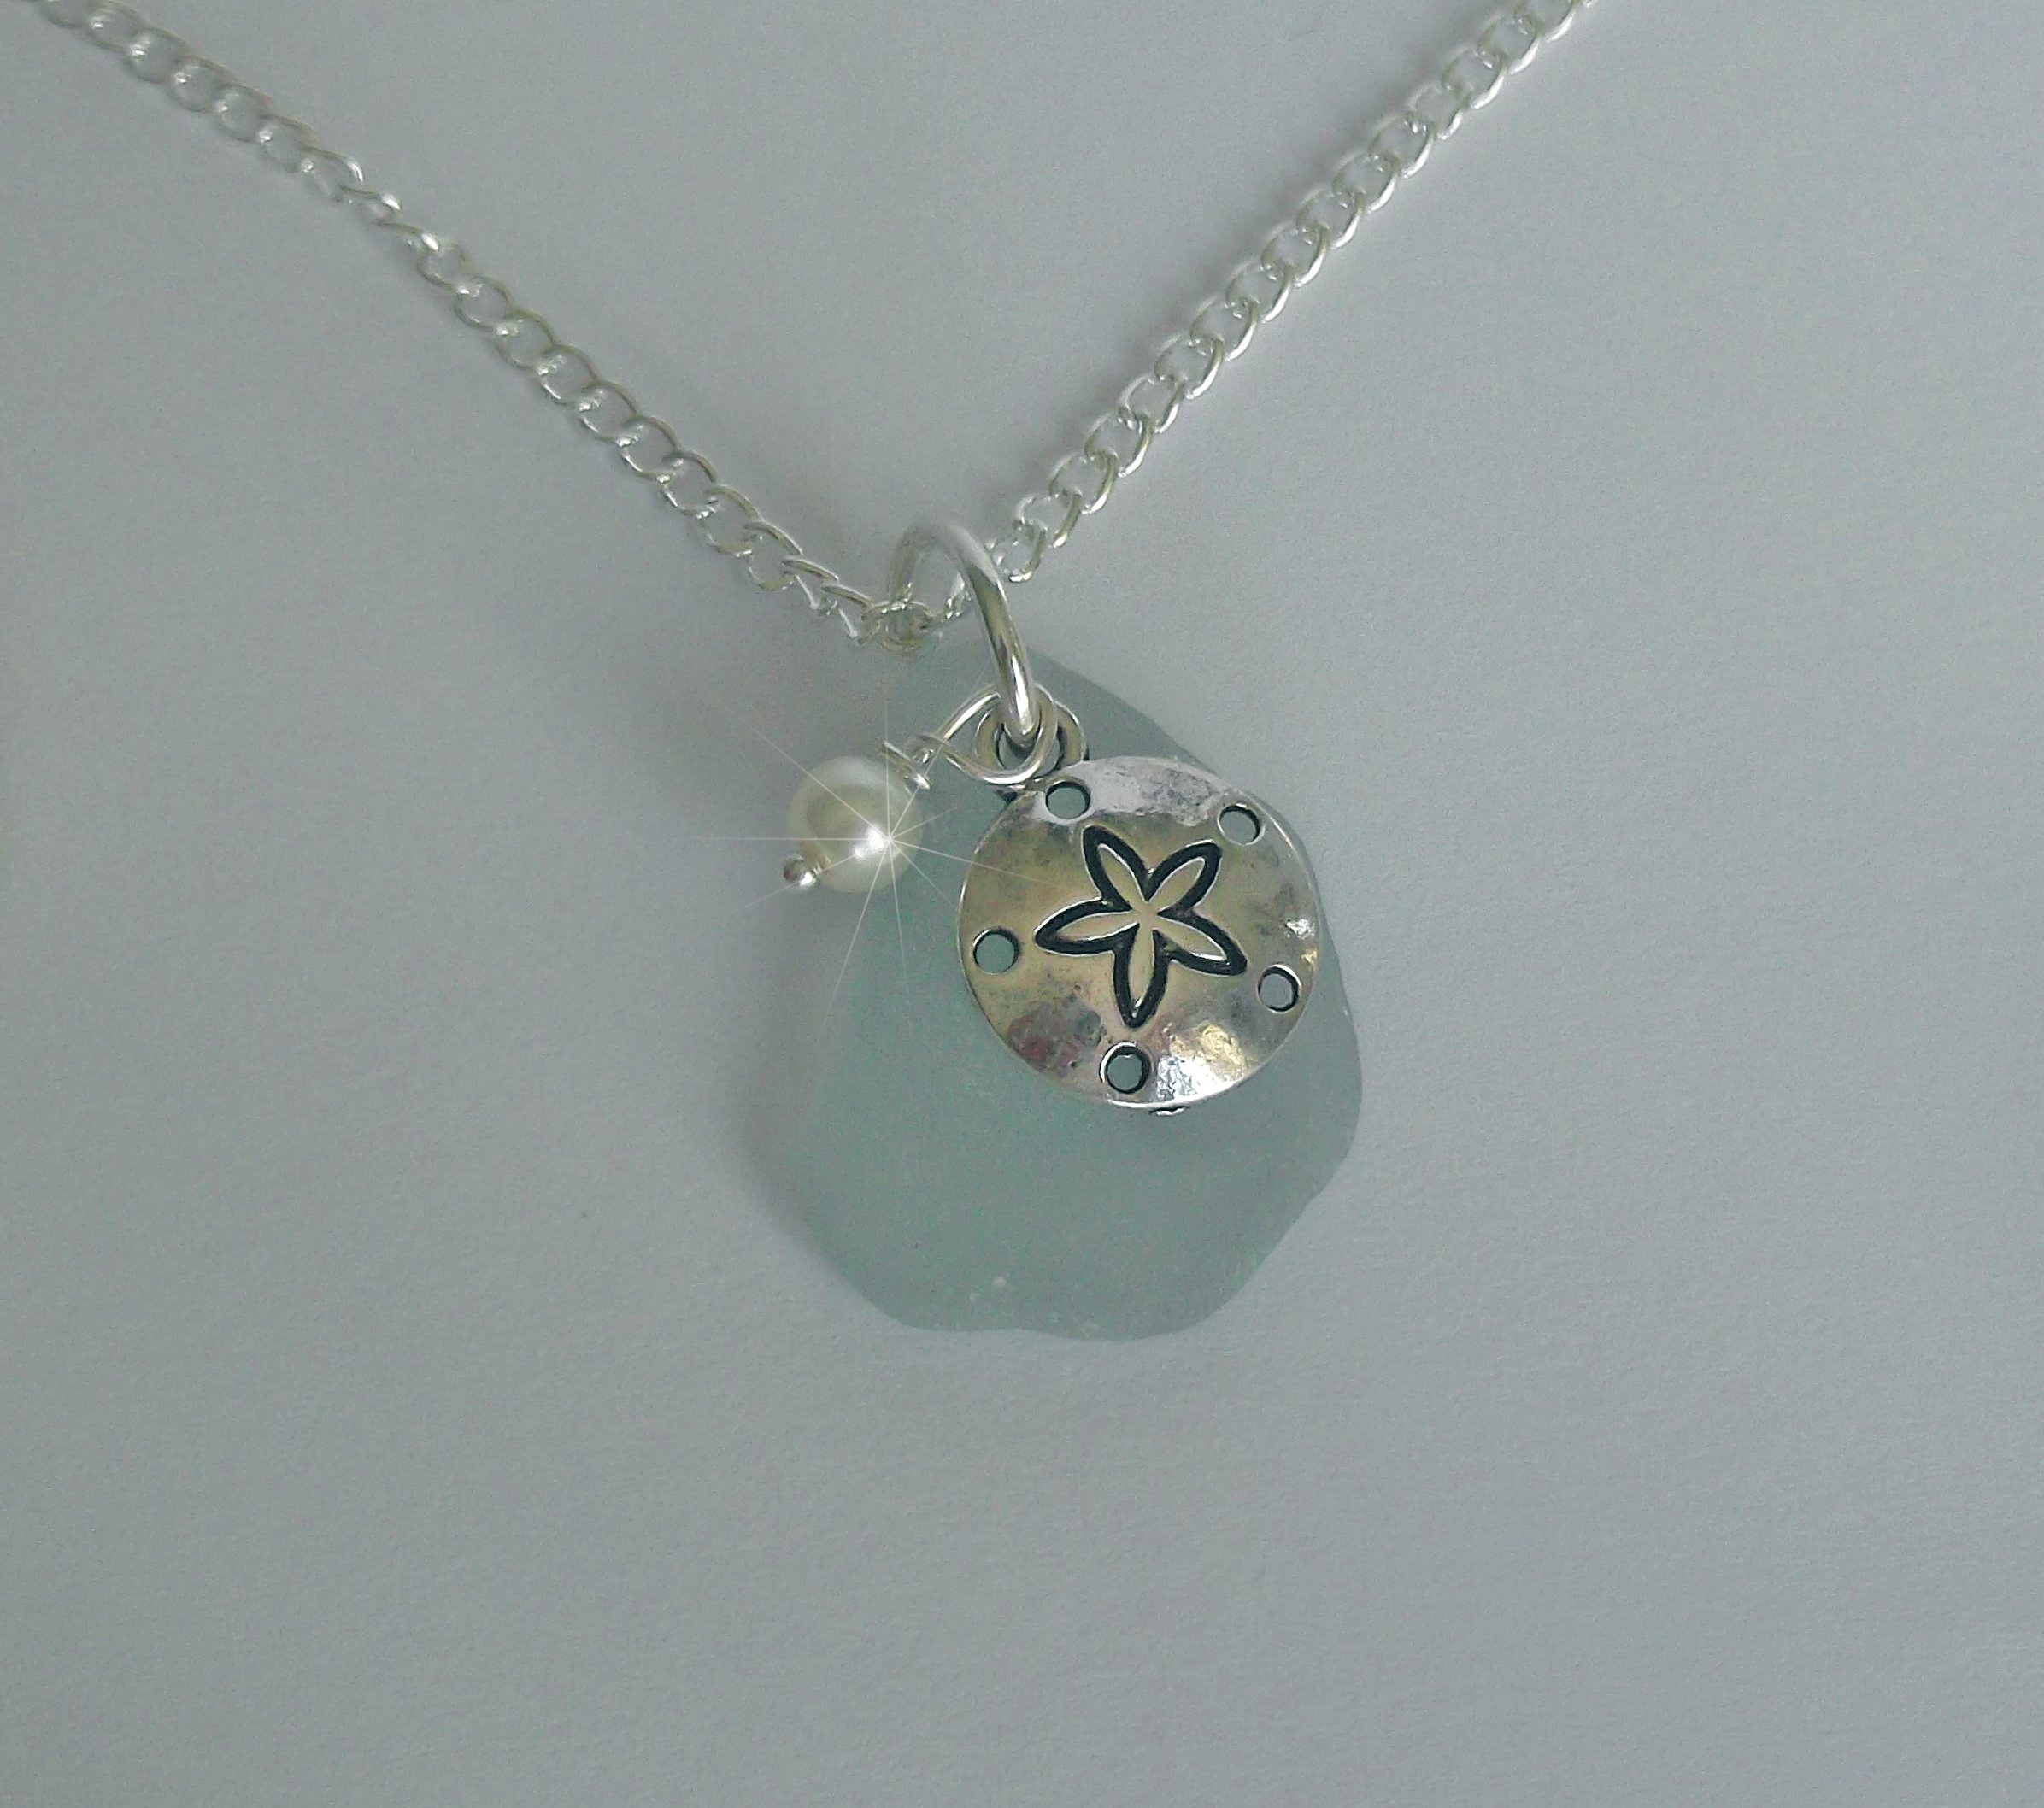 sea glass necklace CYVDSYK